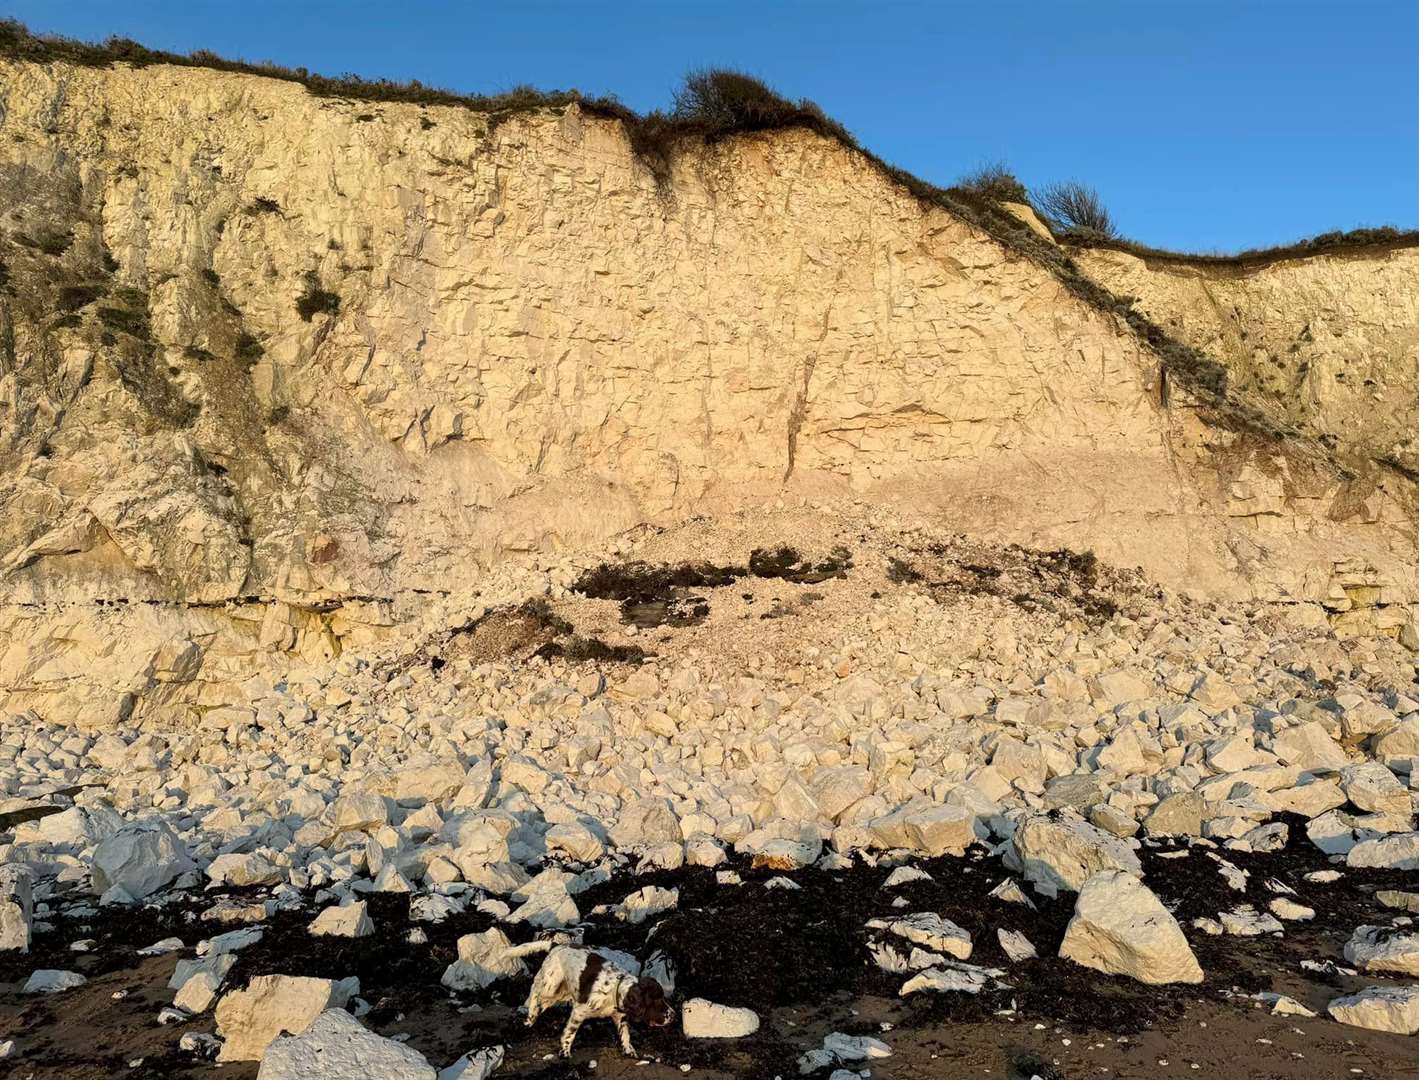 There has been a cliff fall in Dumpton Gap, between Ramsgate and Broadstairs. Picture: Gill Allan